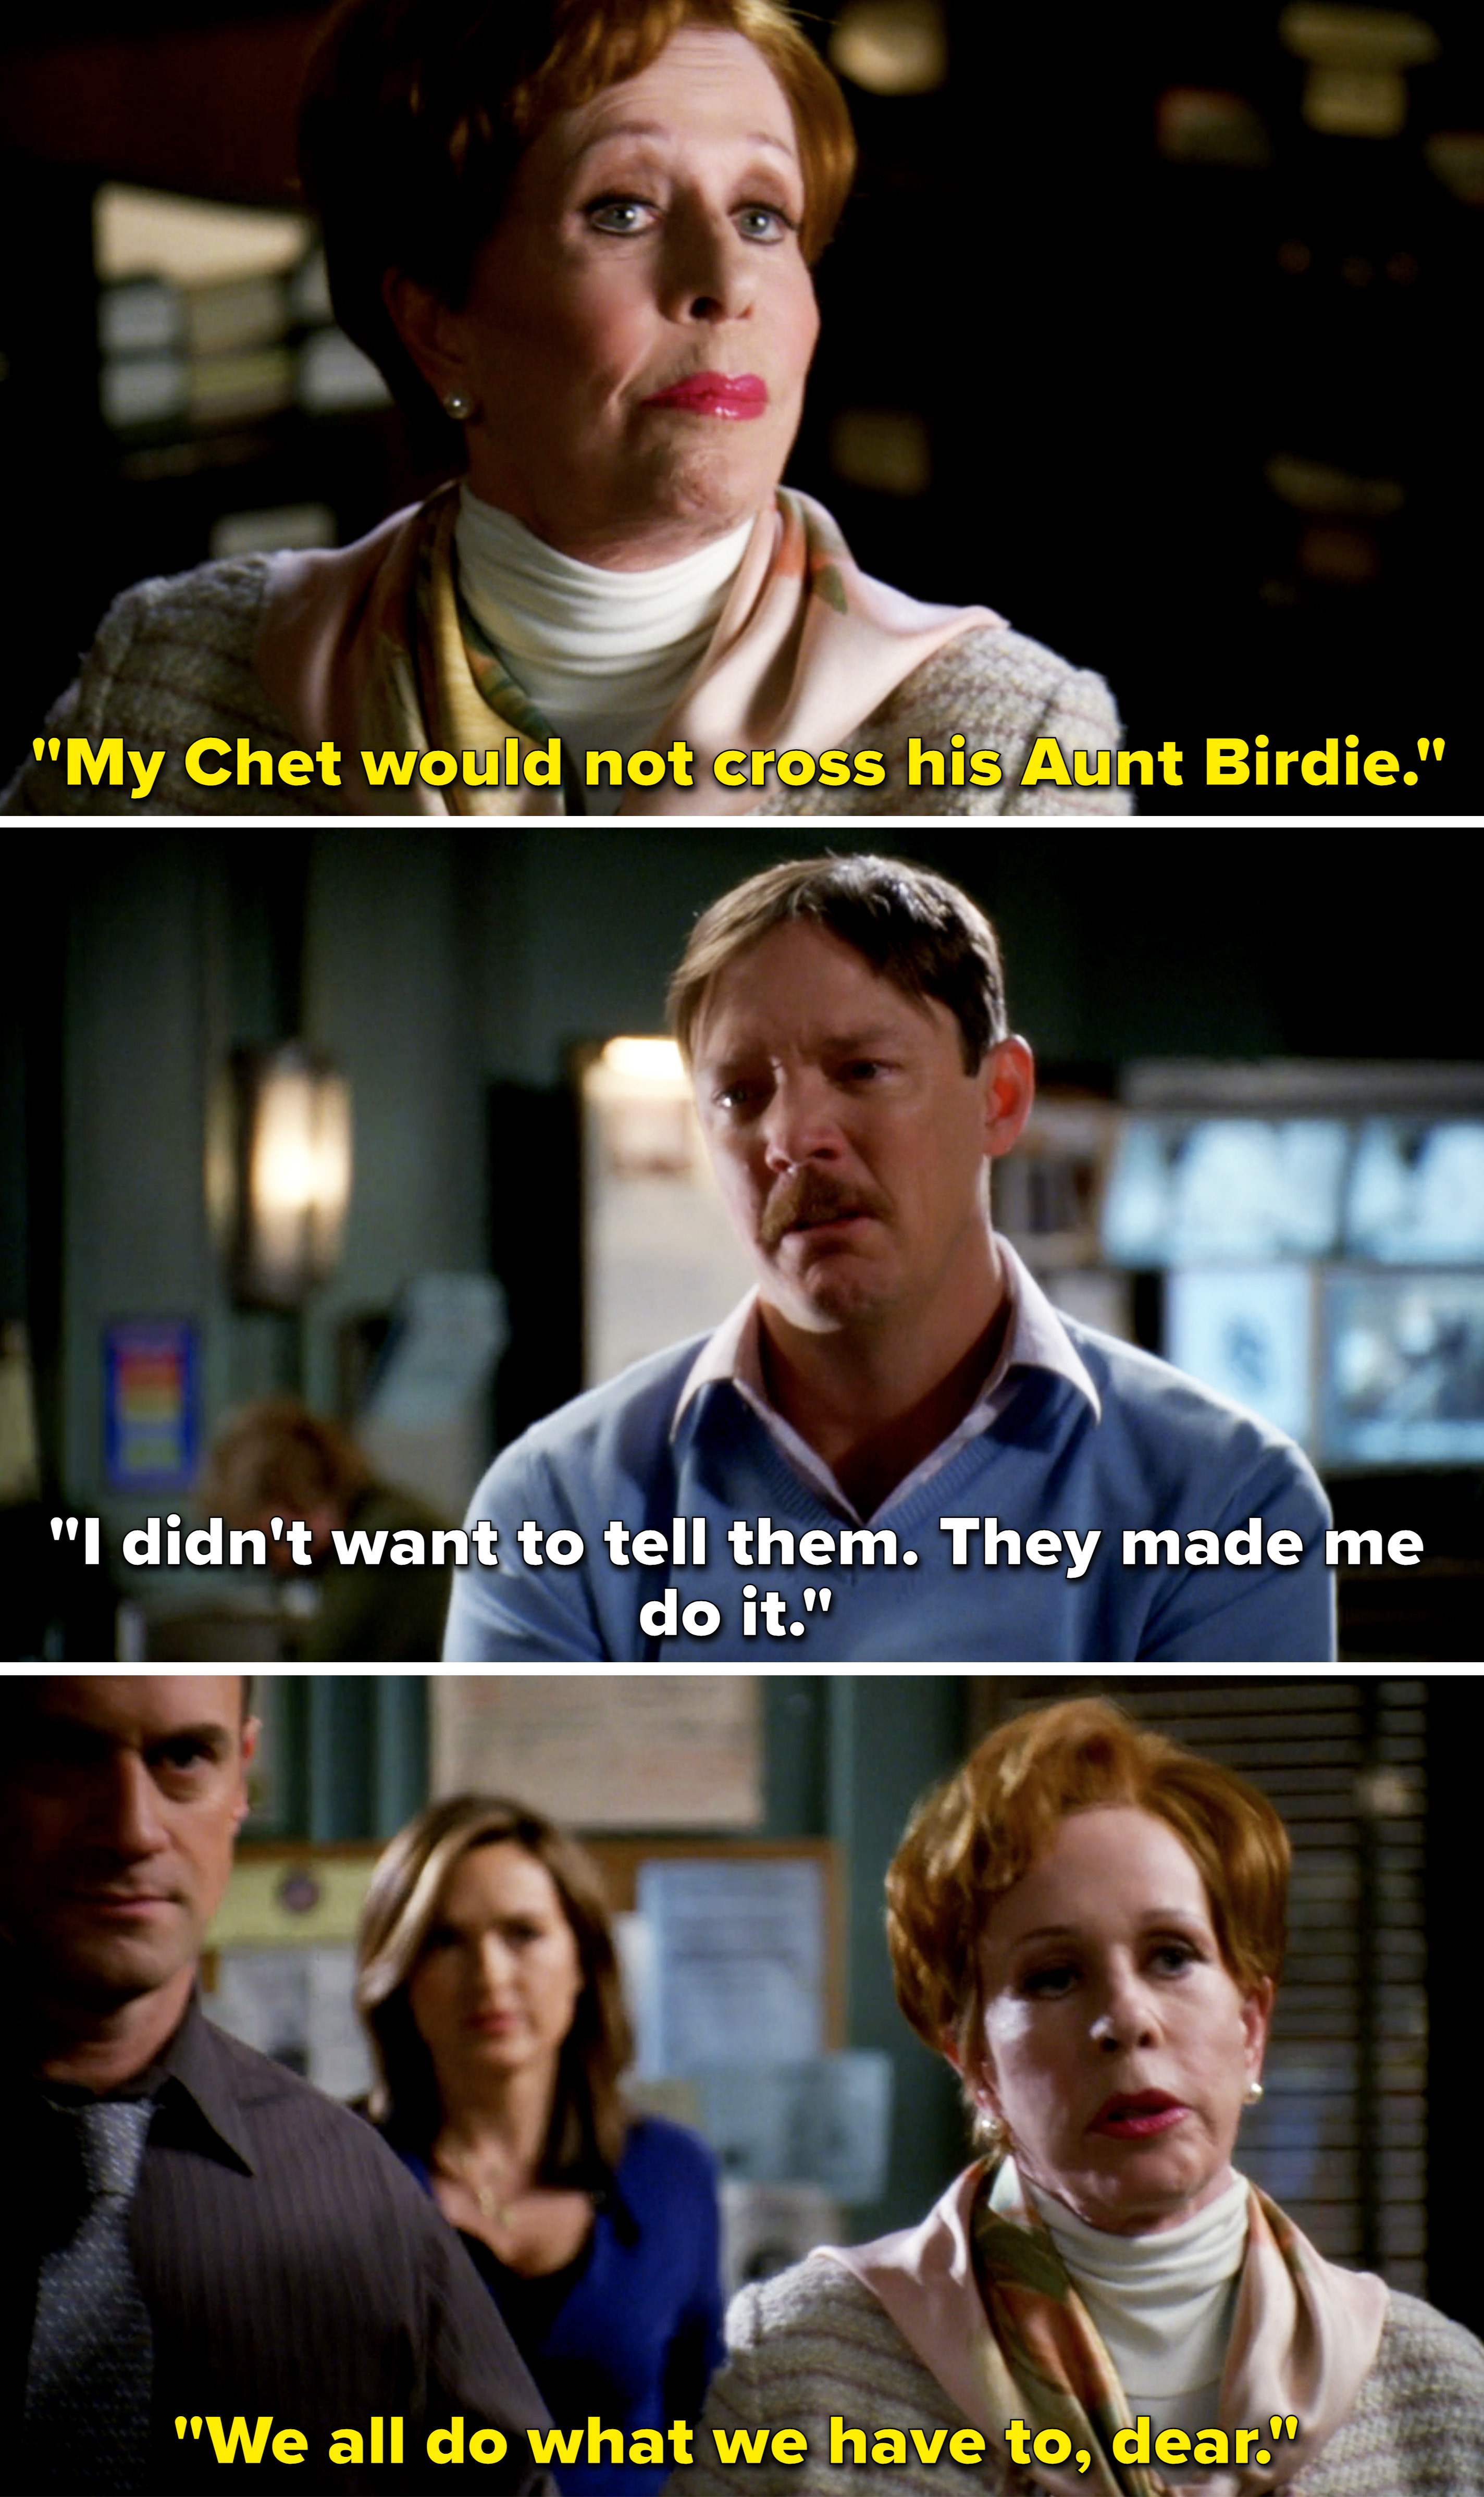 Bridget: My chet would not cross his aunt birdie. Chet: I didin&#x27;t want to tell them. they made me do it. Bridget: We all do what we have to do, dear